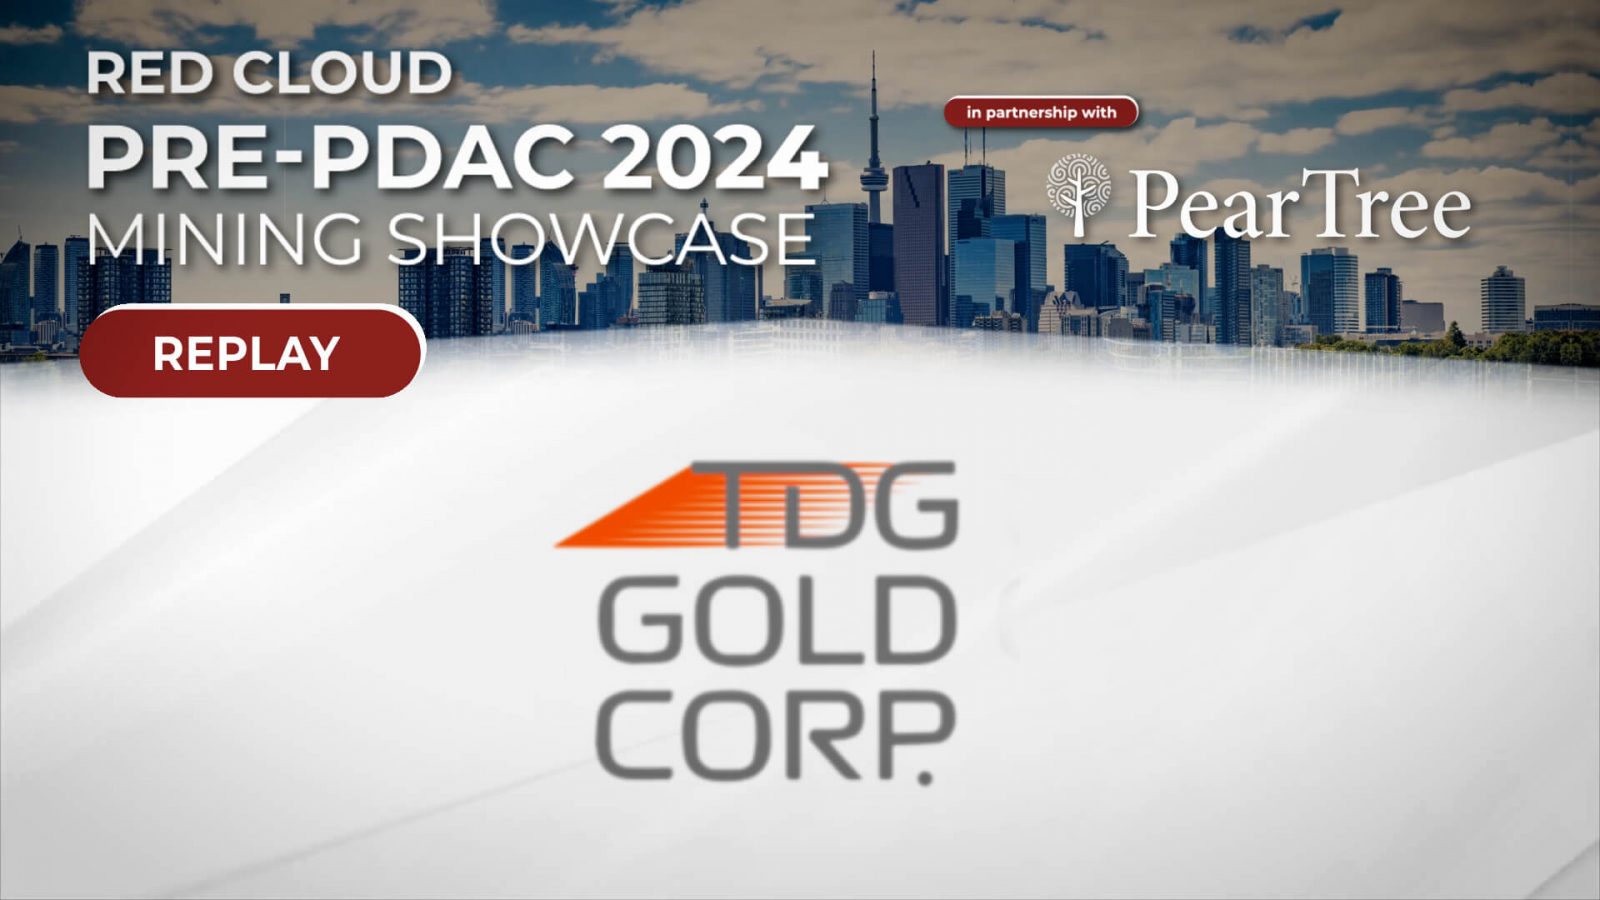 TDG GOLD CORP COMPANY I REPLAY (1)